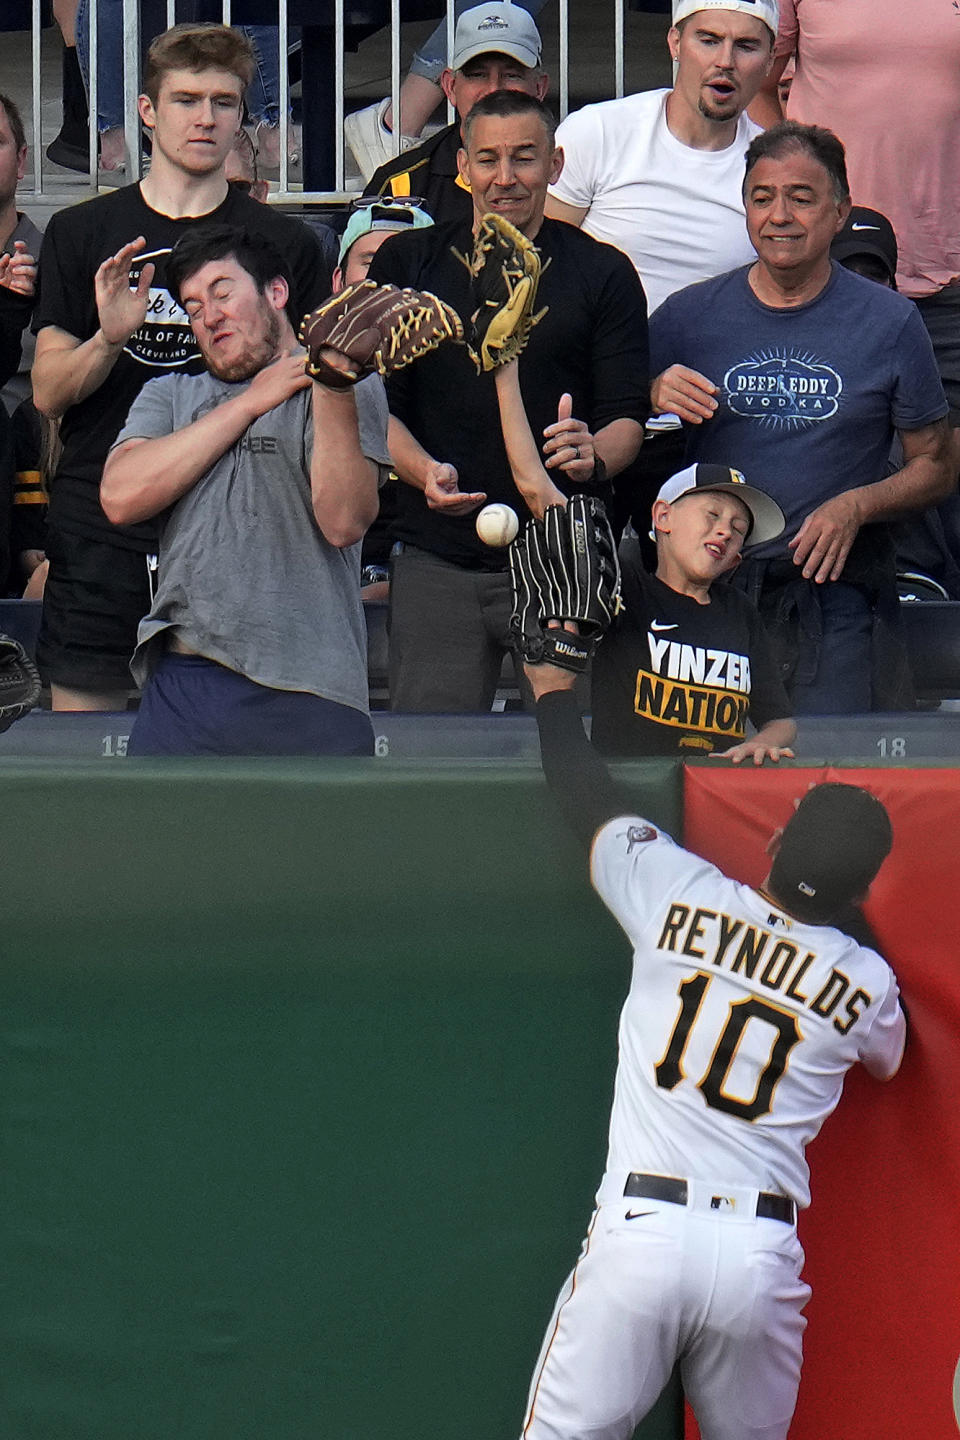 A home-run ball hit by New York Mets' Francisco Lindor lands in the stands out of the reach of Pittsburgh Pirates left fielder Bryan Reynolds (10) during the third inning of a baseball game in Pittsburgh, Friday, June 9, 2023. (AP Photo/Gene J. Puskar)